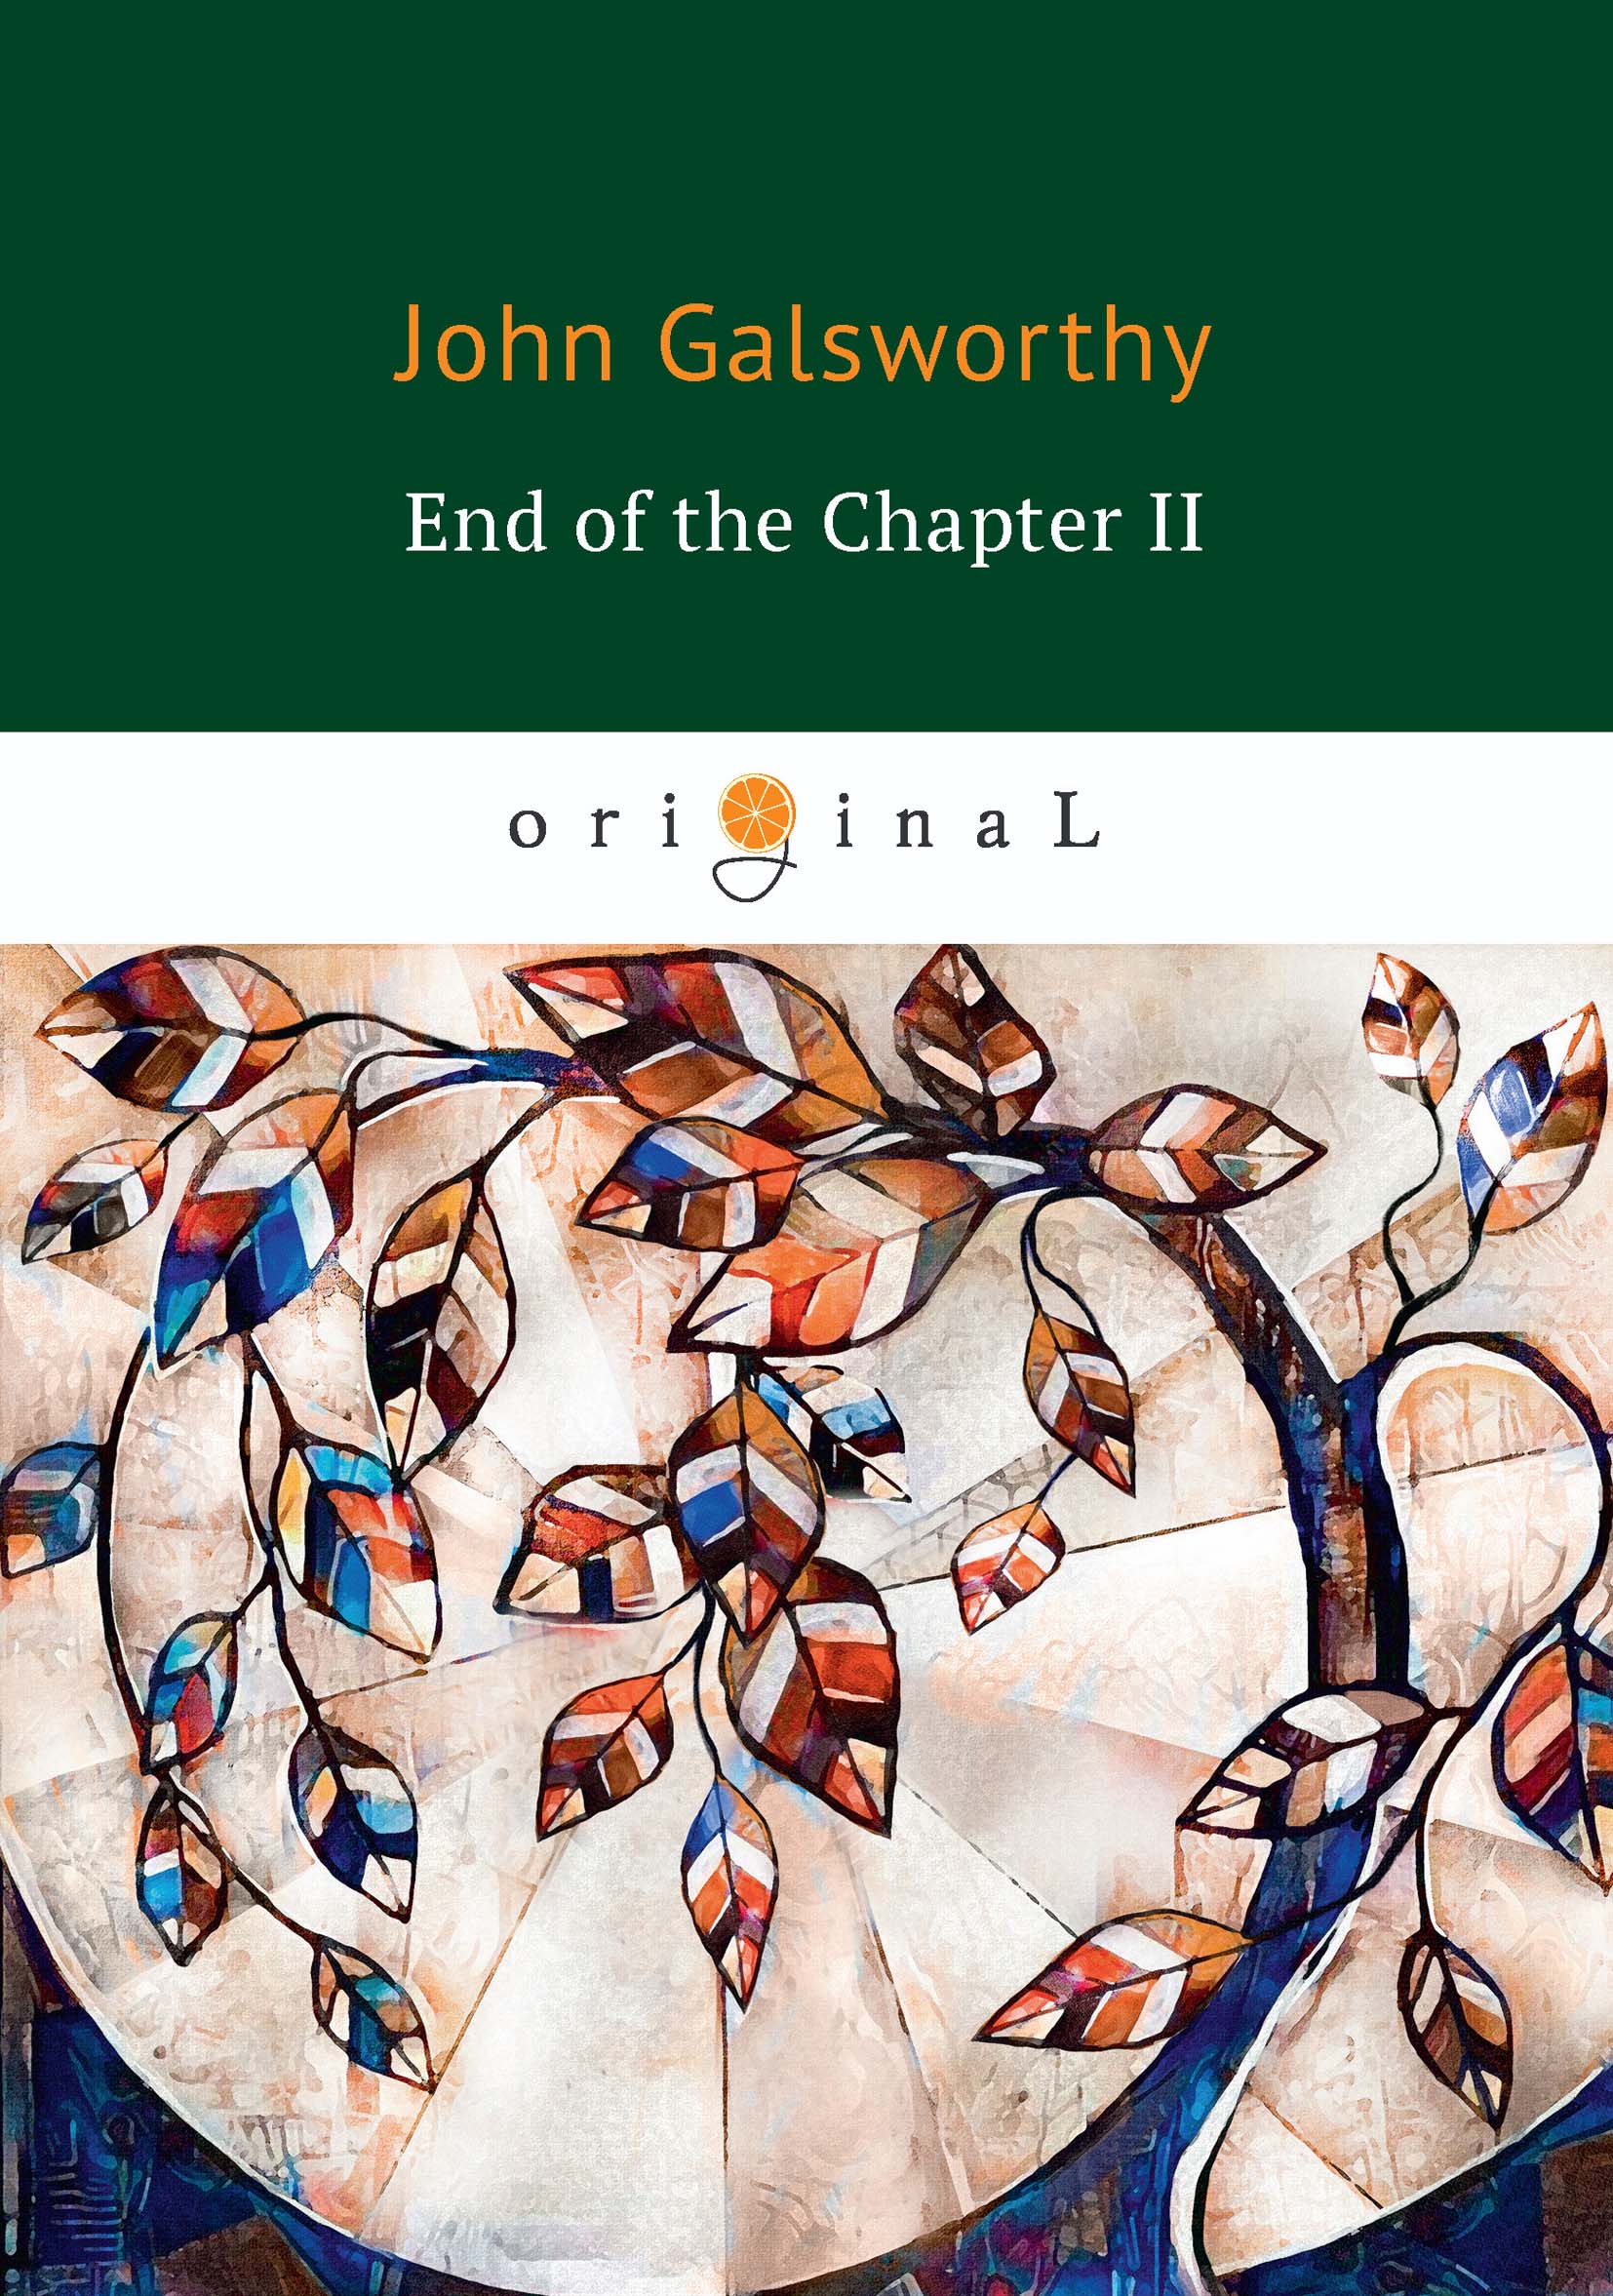 End of the Chapter II